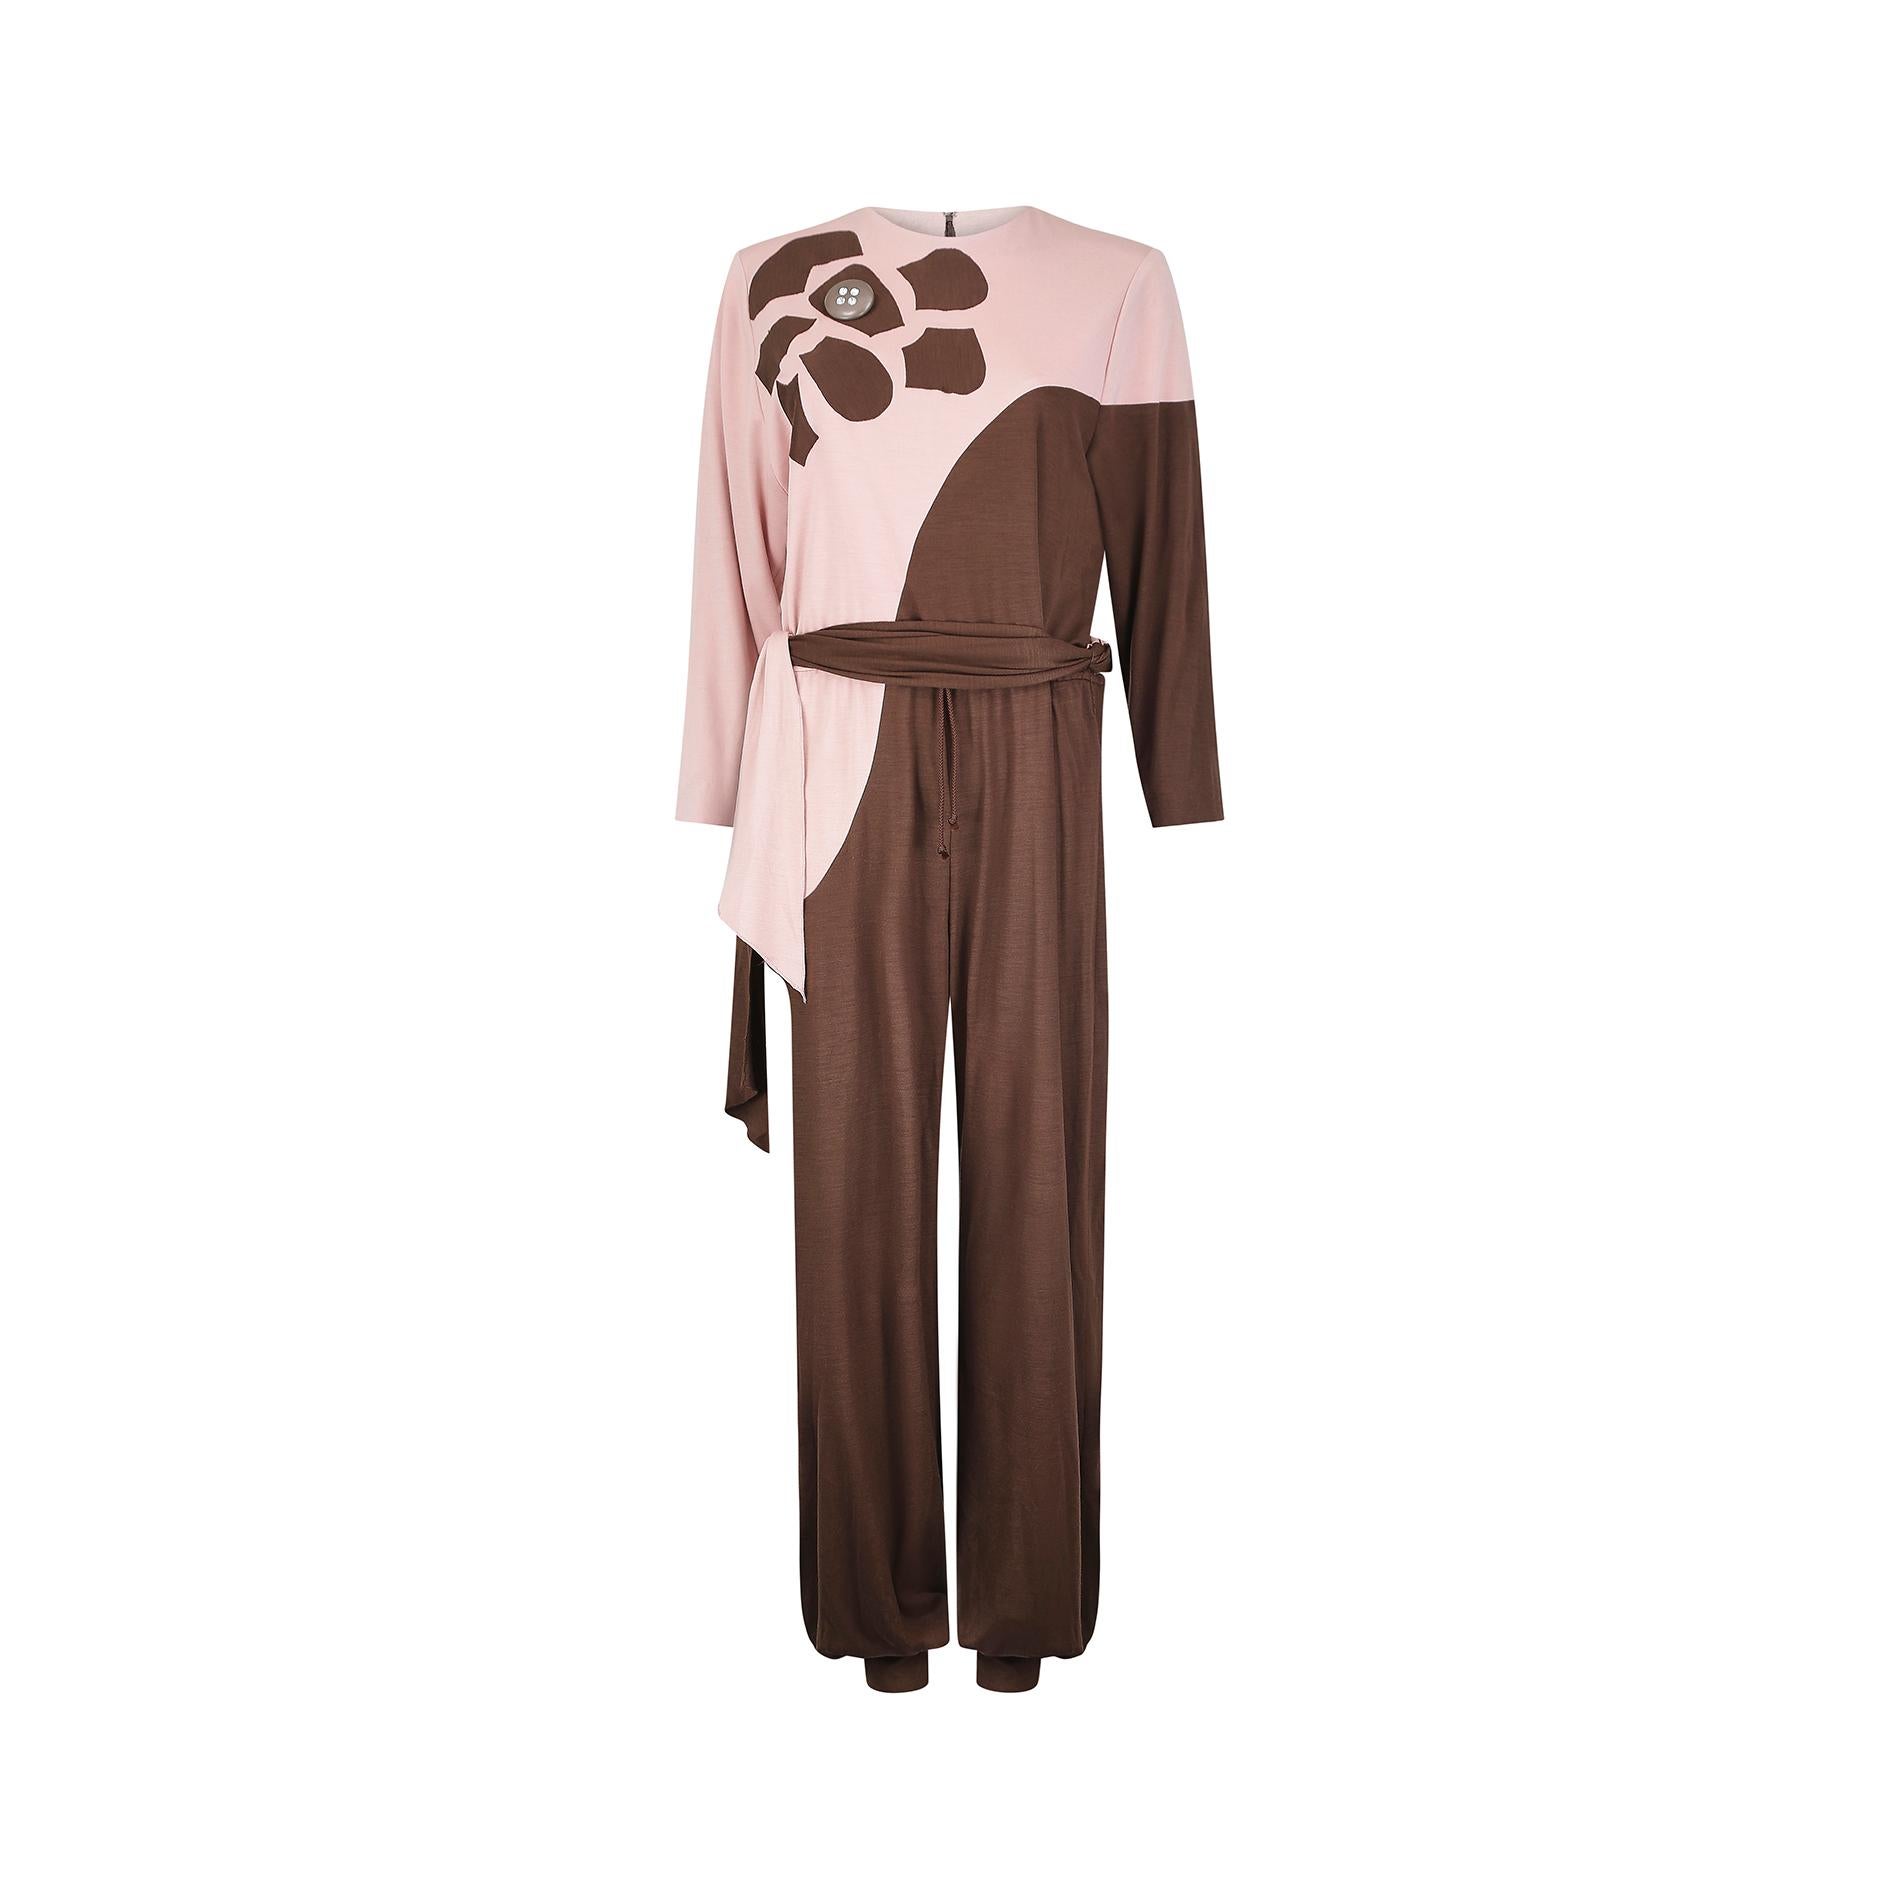 An early form of athleisure wear, this late 1970s to early 1980s Louis Mari jumpsuit is constructed from a soft and lightweight wool/acrylic jersey material in shades of pale pink and brown. It has a high, rounded neckline with sleeves which narrow